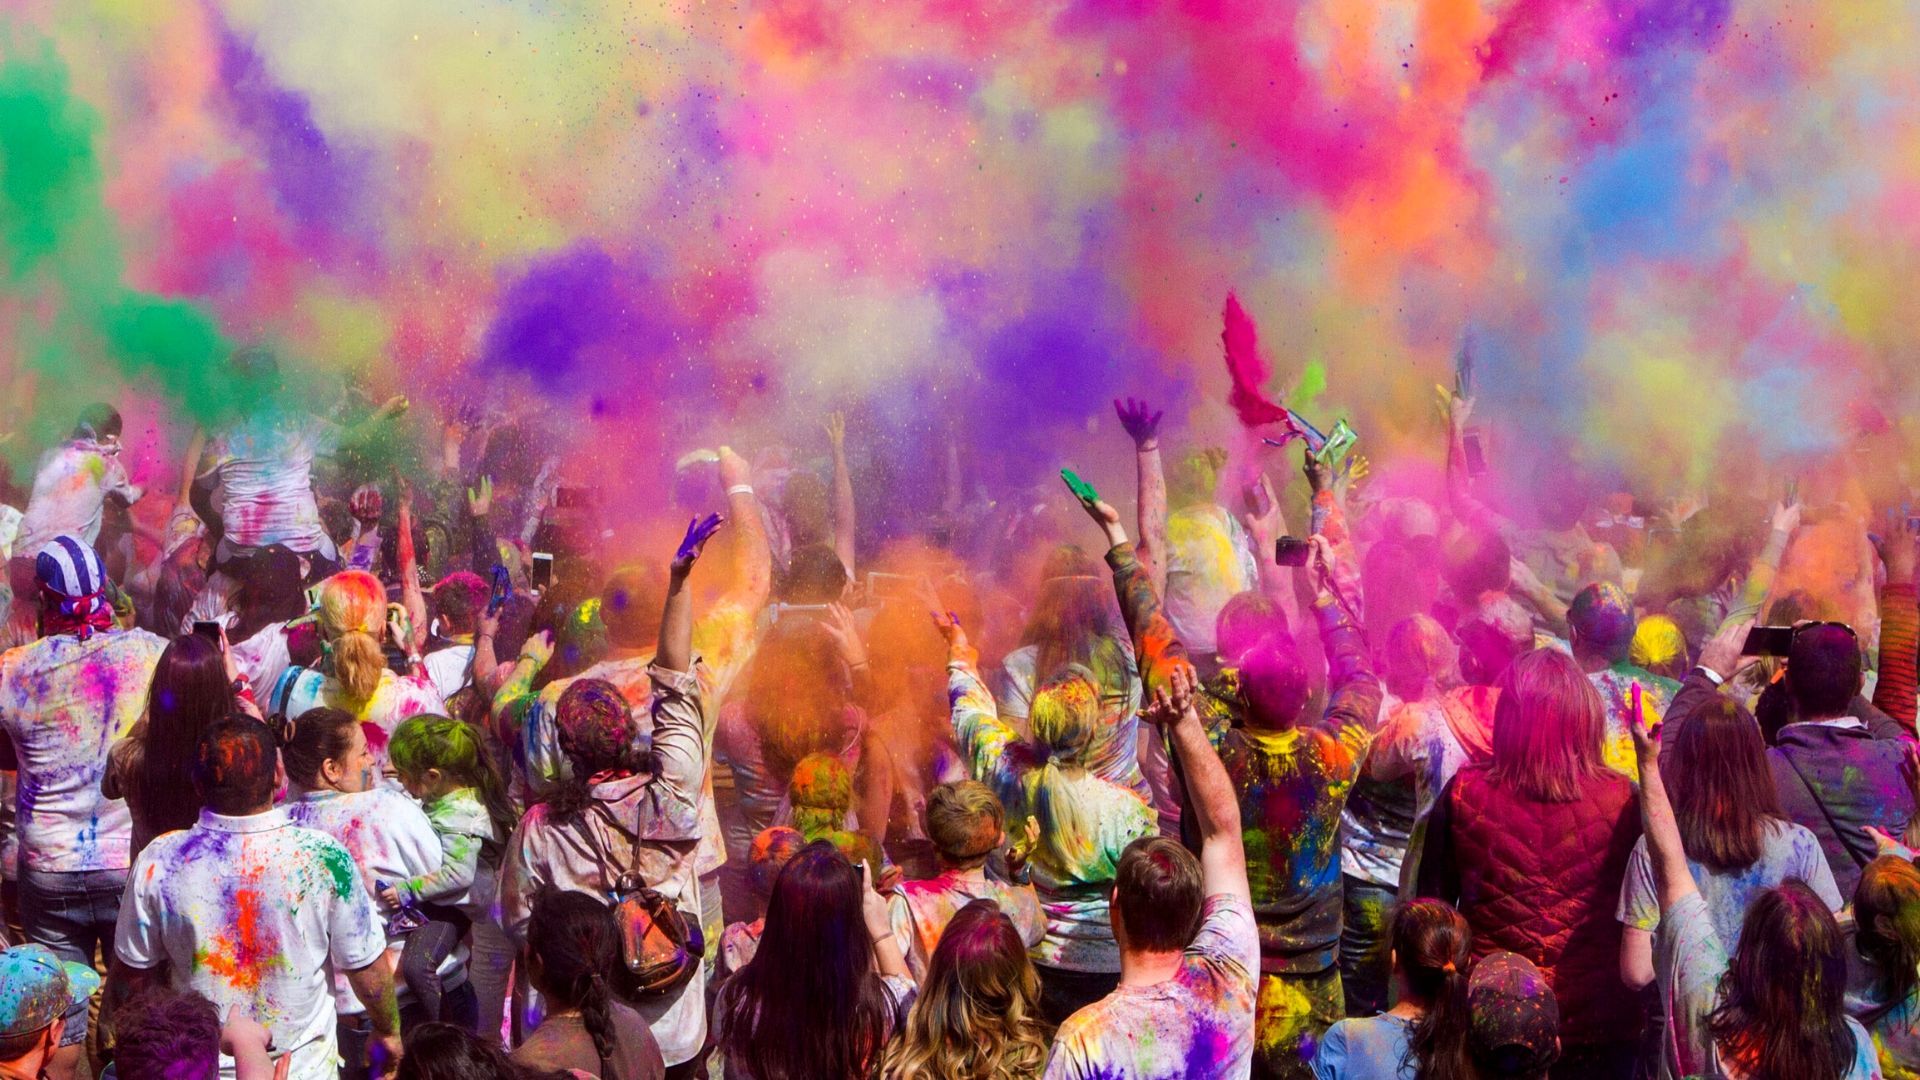 14 Indian Festivals That Celebrate The Many Cultures In India